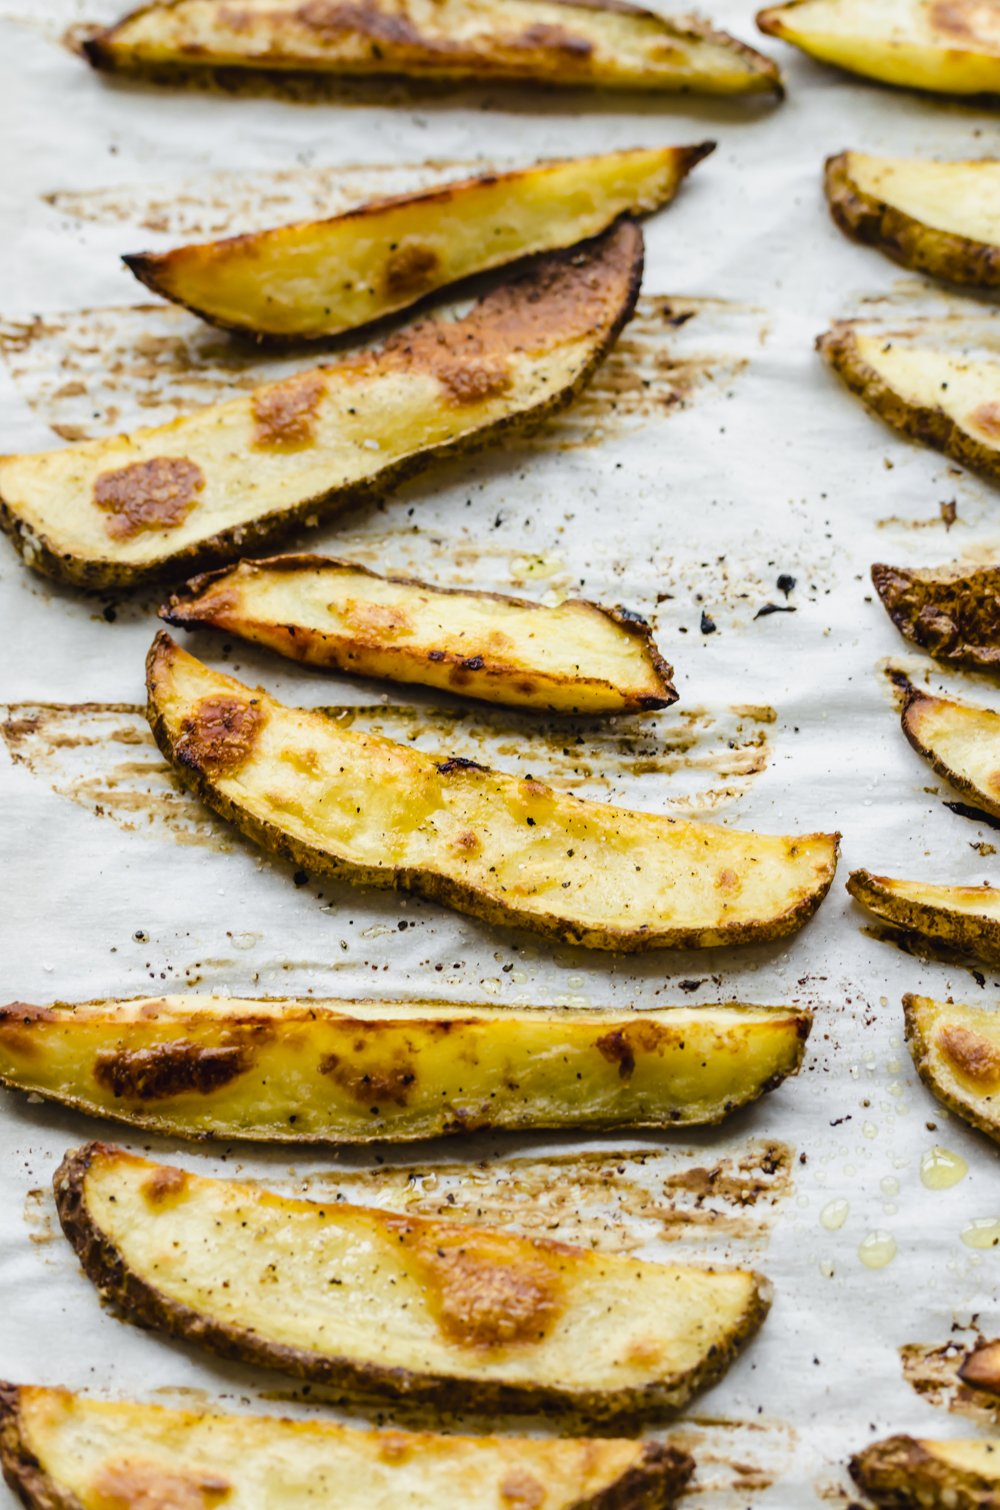 Oven roasted fries on parchment paper on a sheet pan.